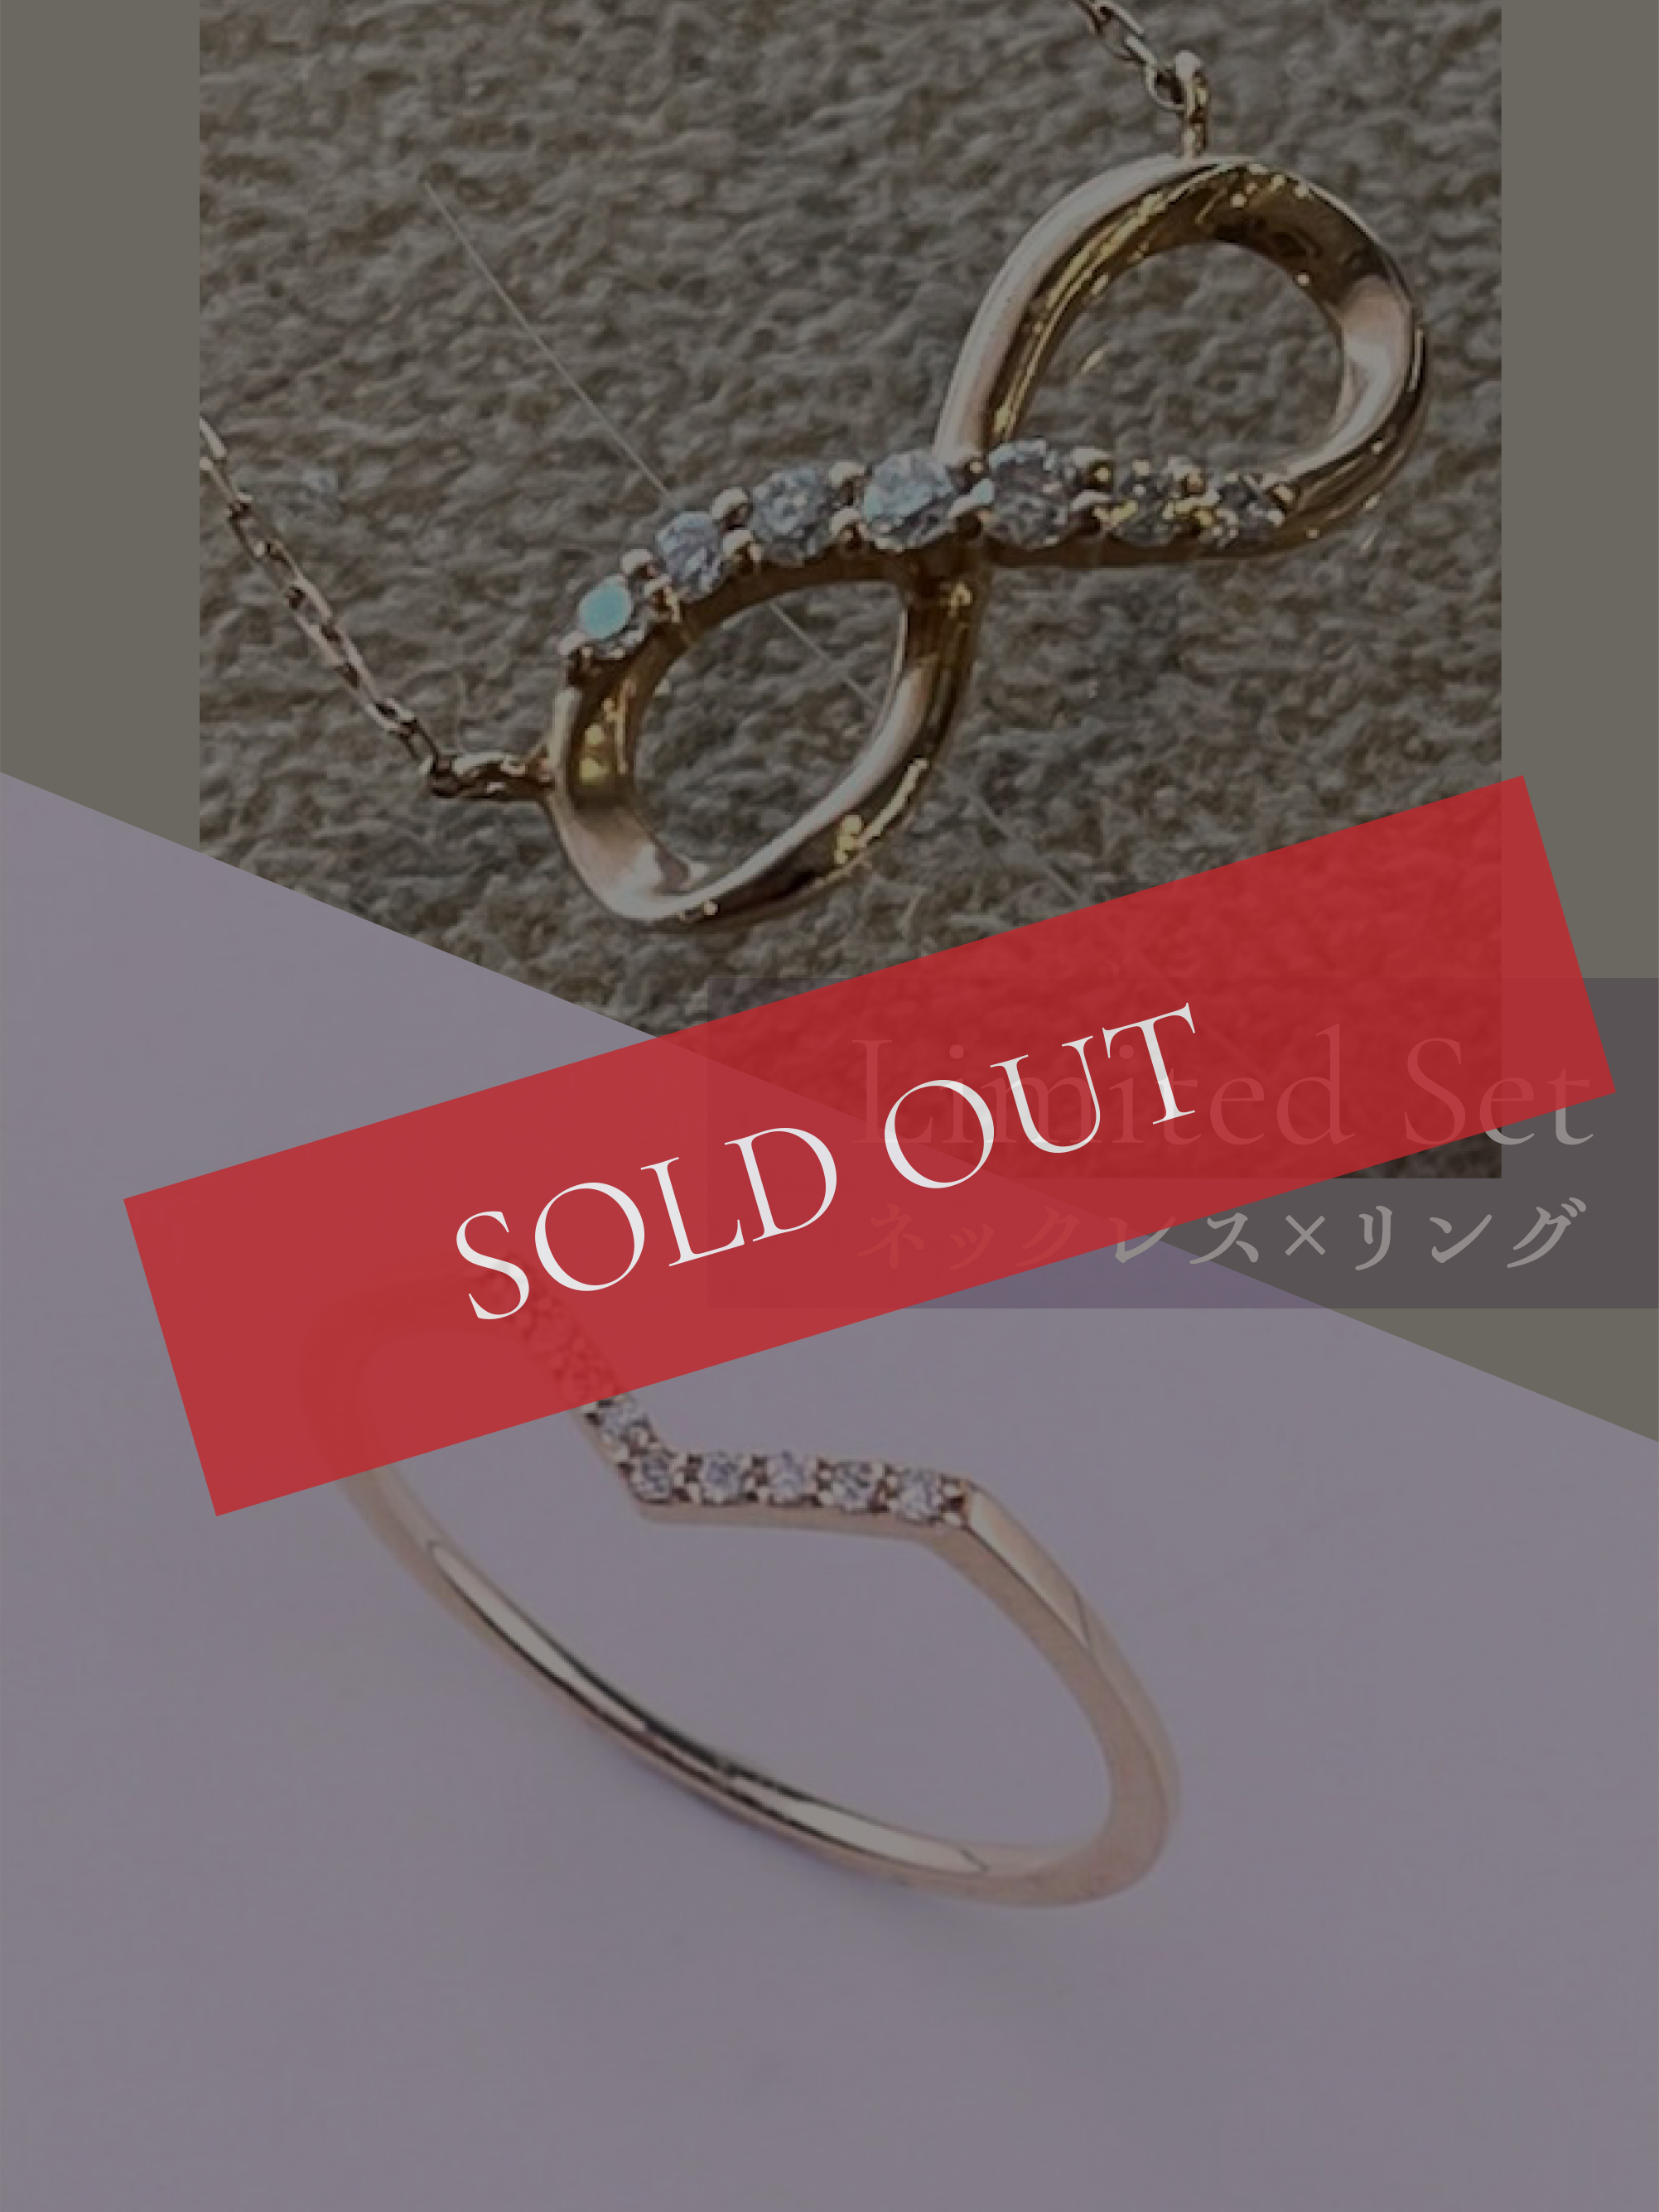 SOLD OUT［限定5セット］ダイヤ ネックレス＆ダイヤ V字 リング